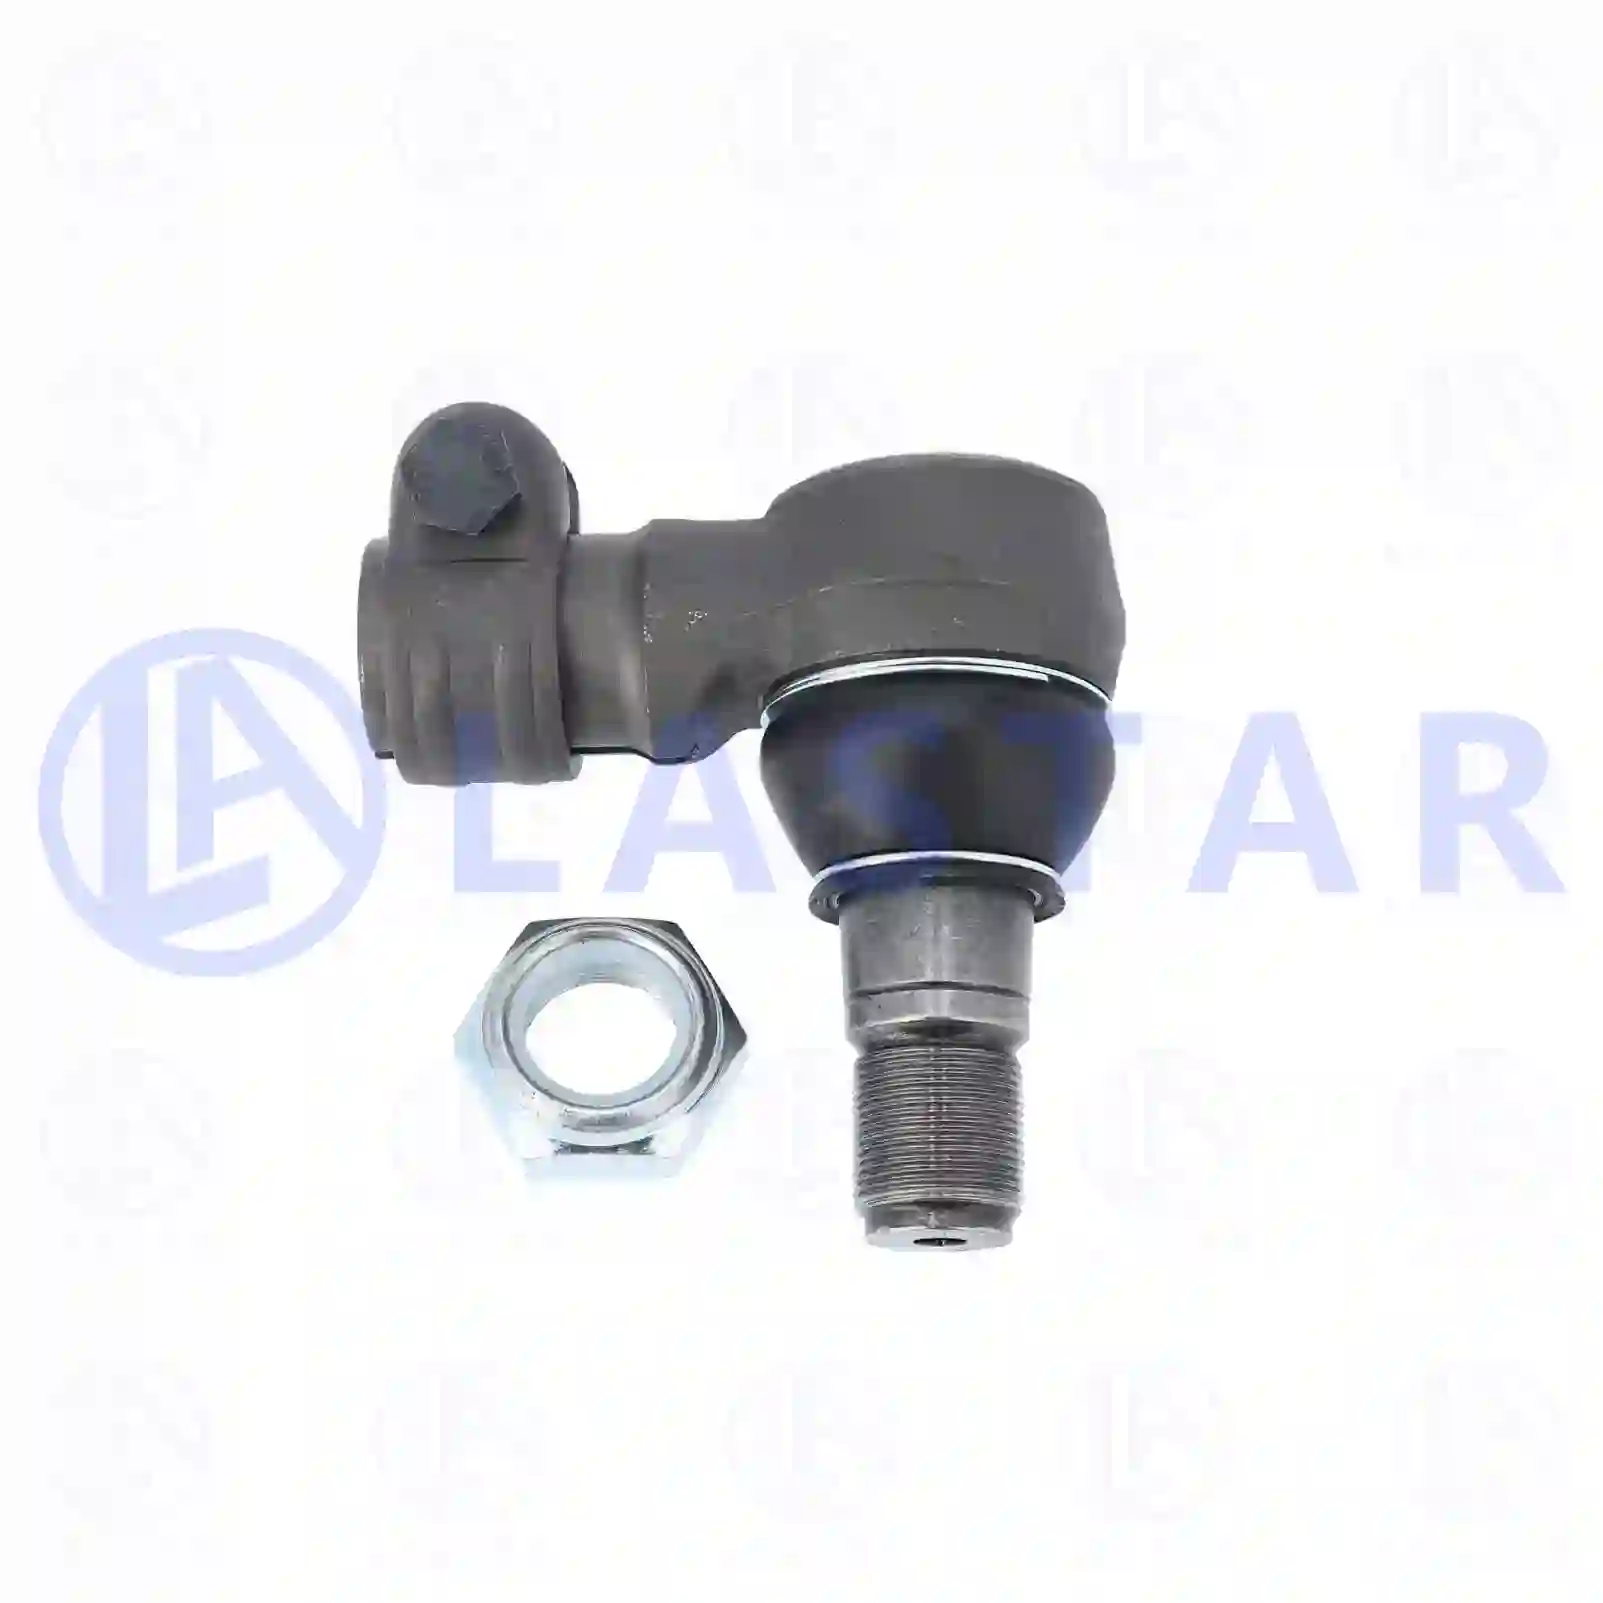 Ball joint, 77705542, 0024602248, , , ||  77705542 Lastar Spare Part | Truck Spare Parts, Auotomotive Spare Parts Ball joint, 77705542, 0024602248, , , ||  77705542 Lastar Spare Part | Truck Spare Parts, Auotomotive Spare Parts